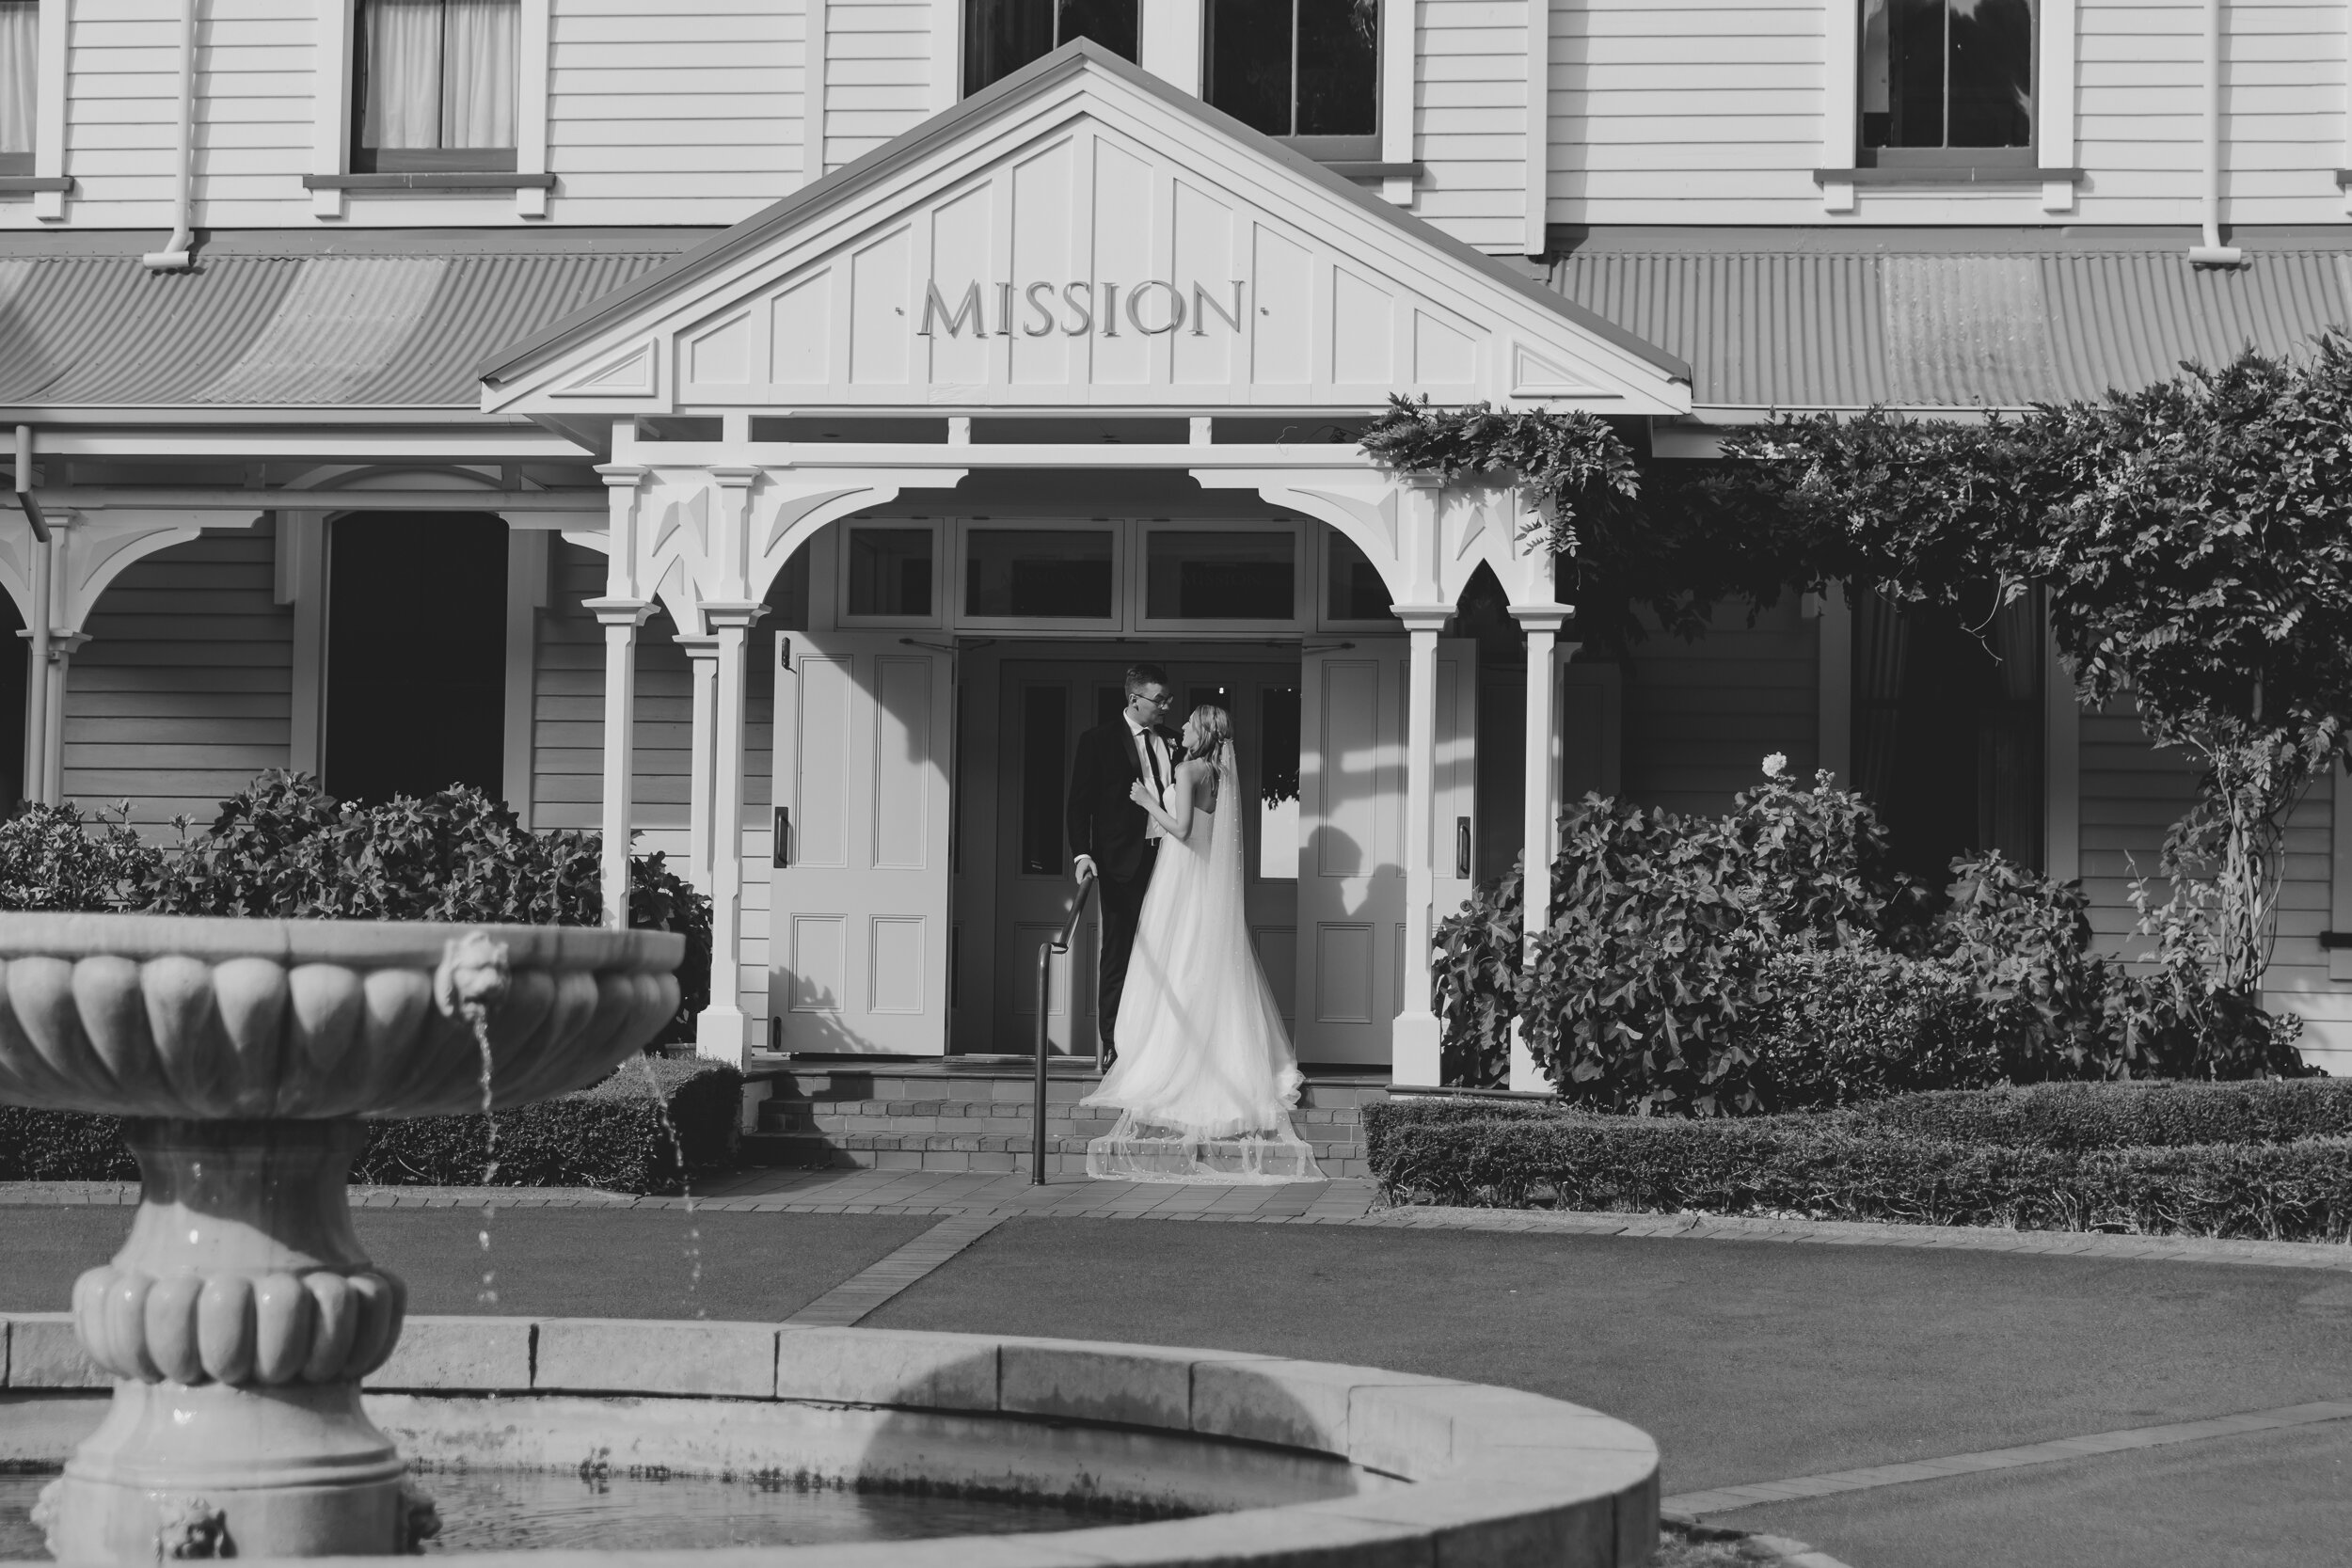 napier-wedding-venues-the-mission-winery